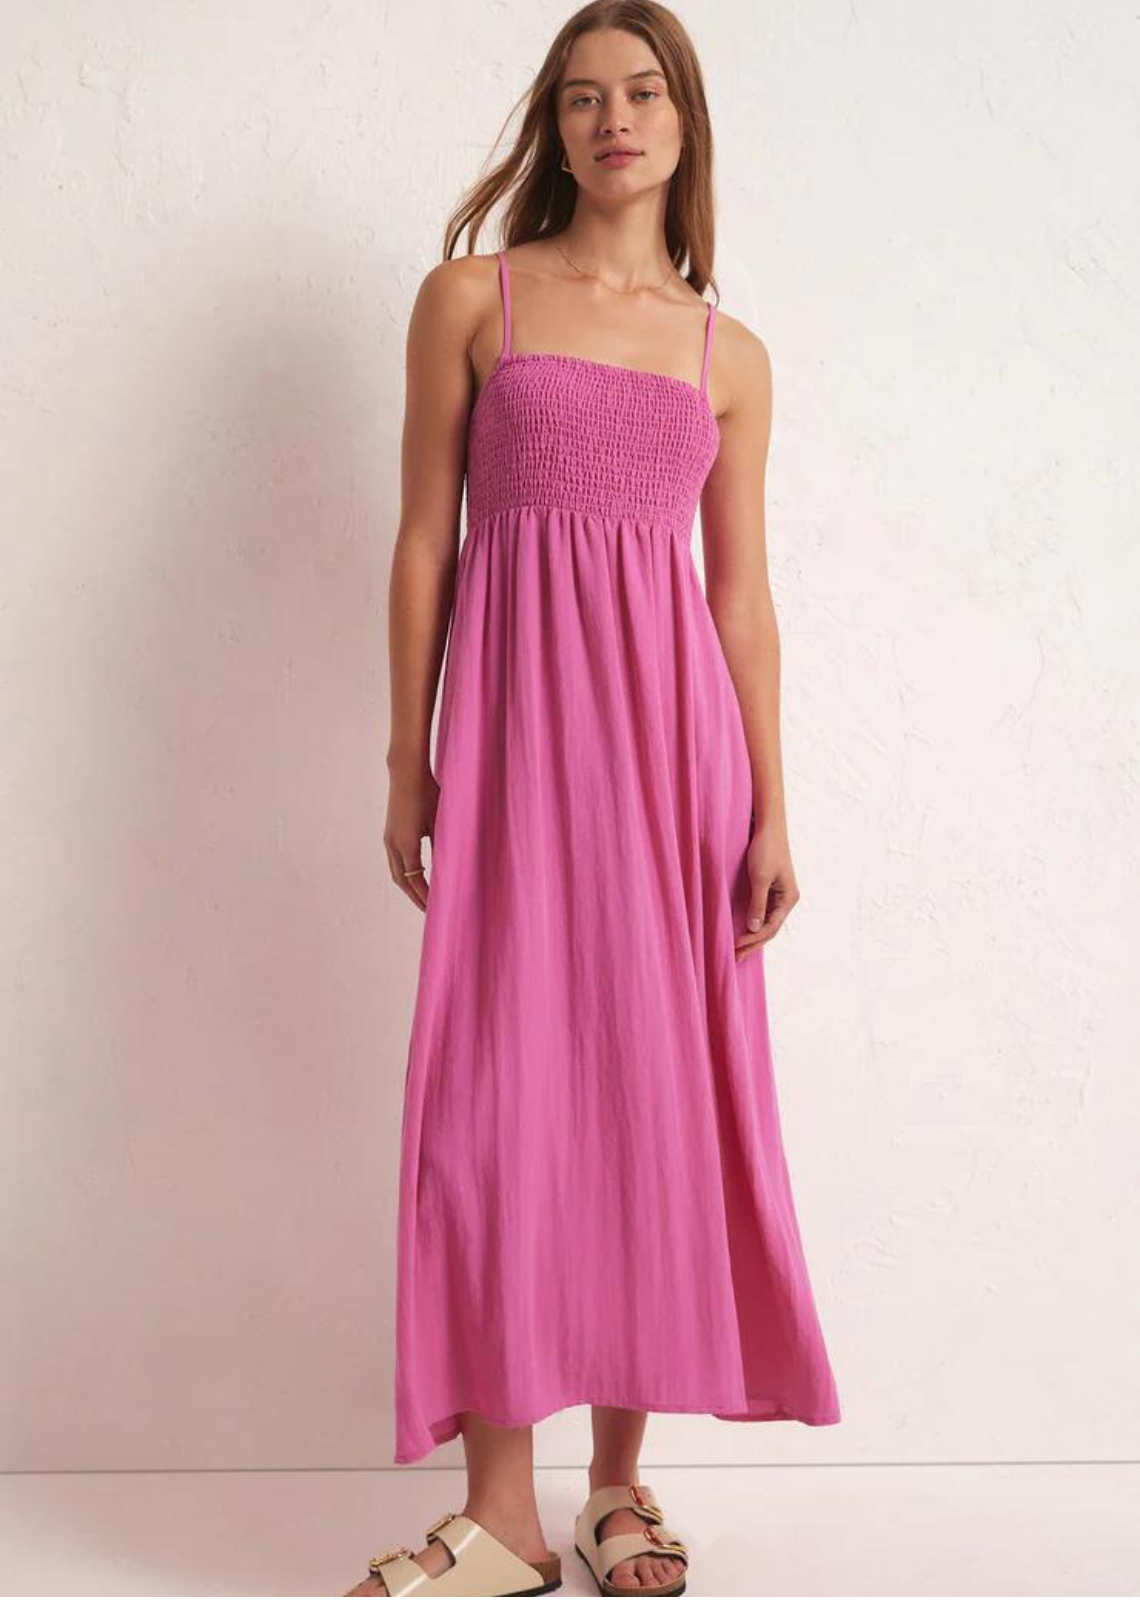 Z Supply Beachside Midi Dress - Heartbreaker Pink Vacation is calling!  The most perfect midi dress that is fit for the tropics.  Comfy, cute and flattering, it features: Fitted, Smocked Bodice Adjustable Straps Full Skirt Lined Regular Fit 90% Rayon 10% Nylon Style #ZD231223 Fits True to Size